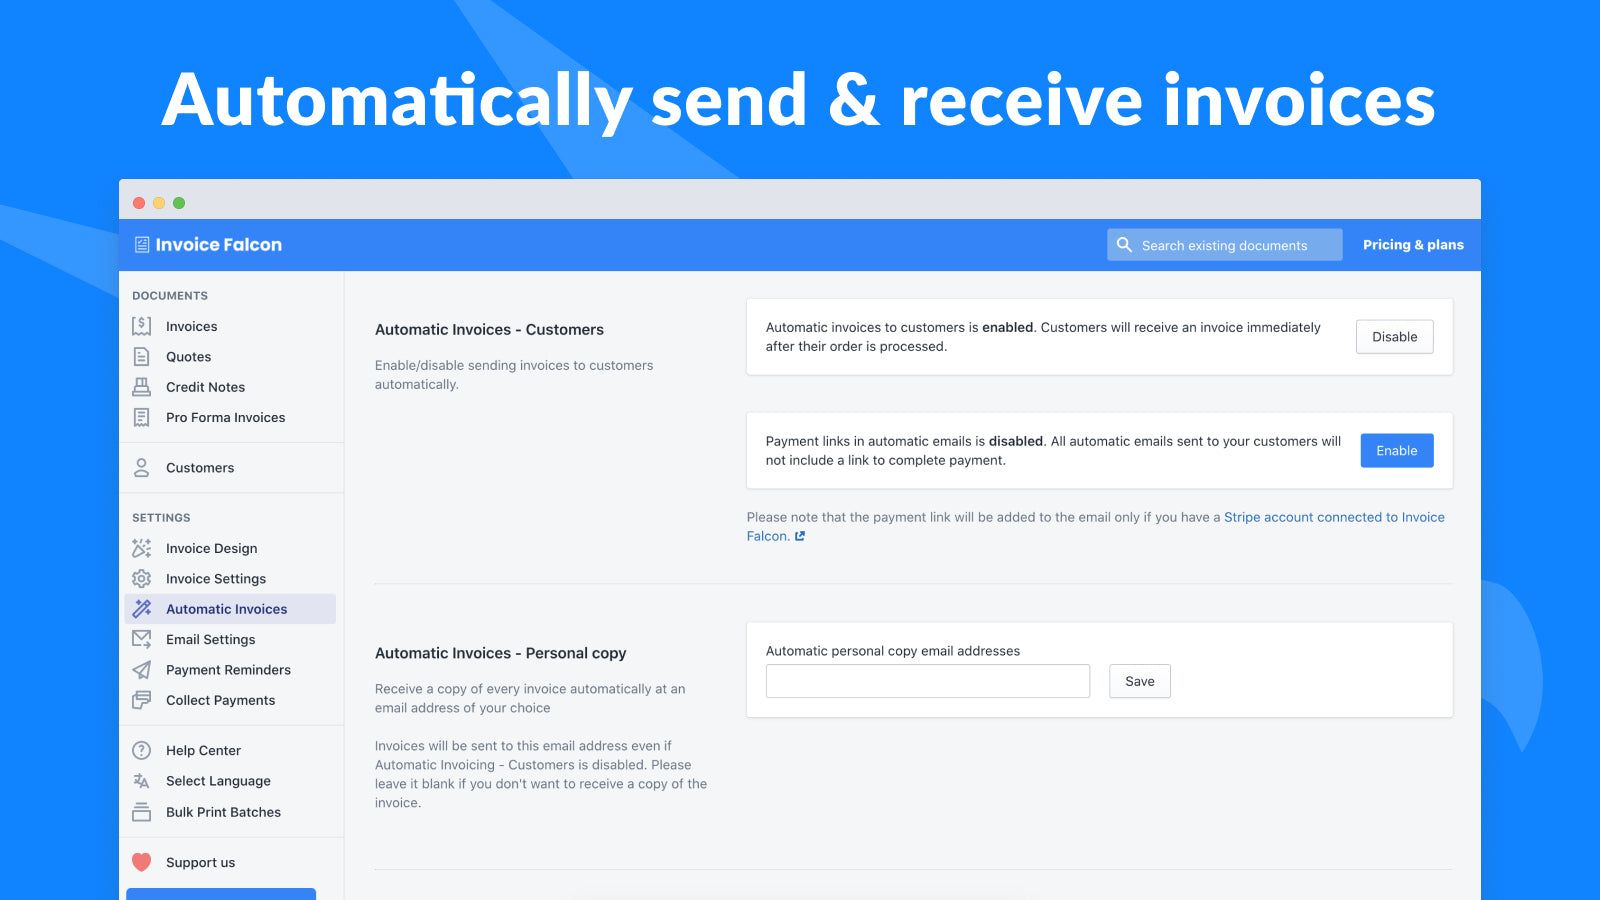 Automatically send & receive invoices